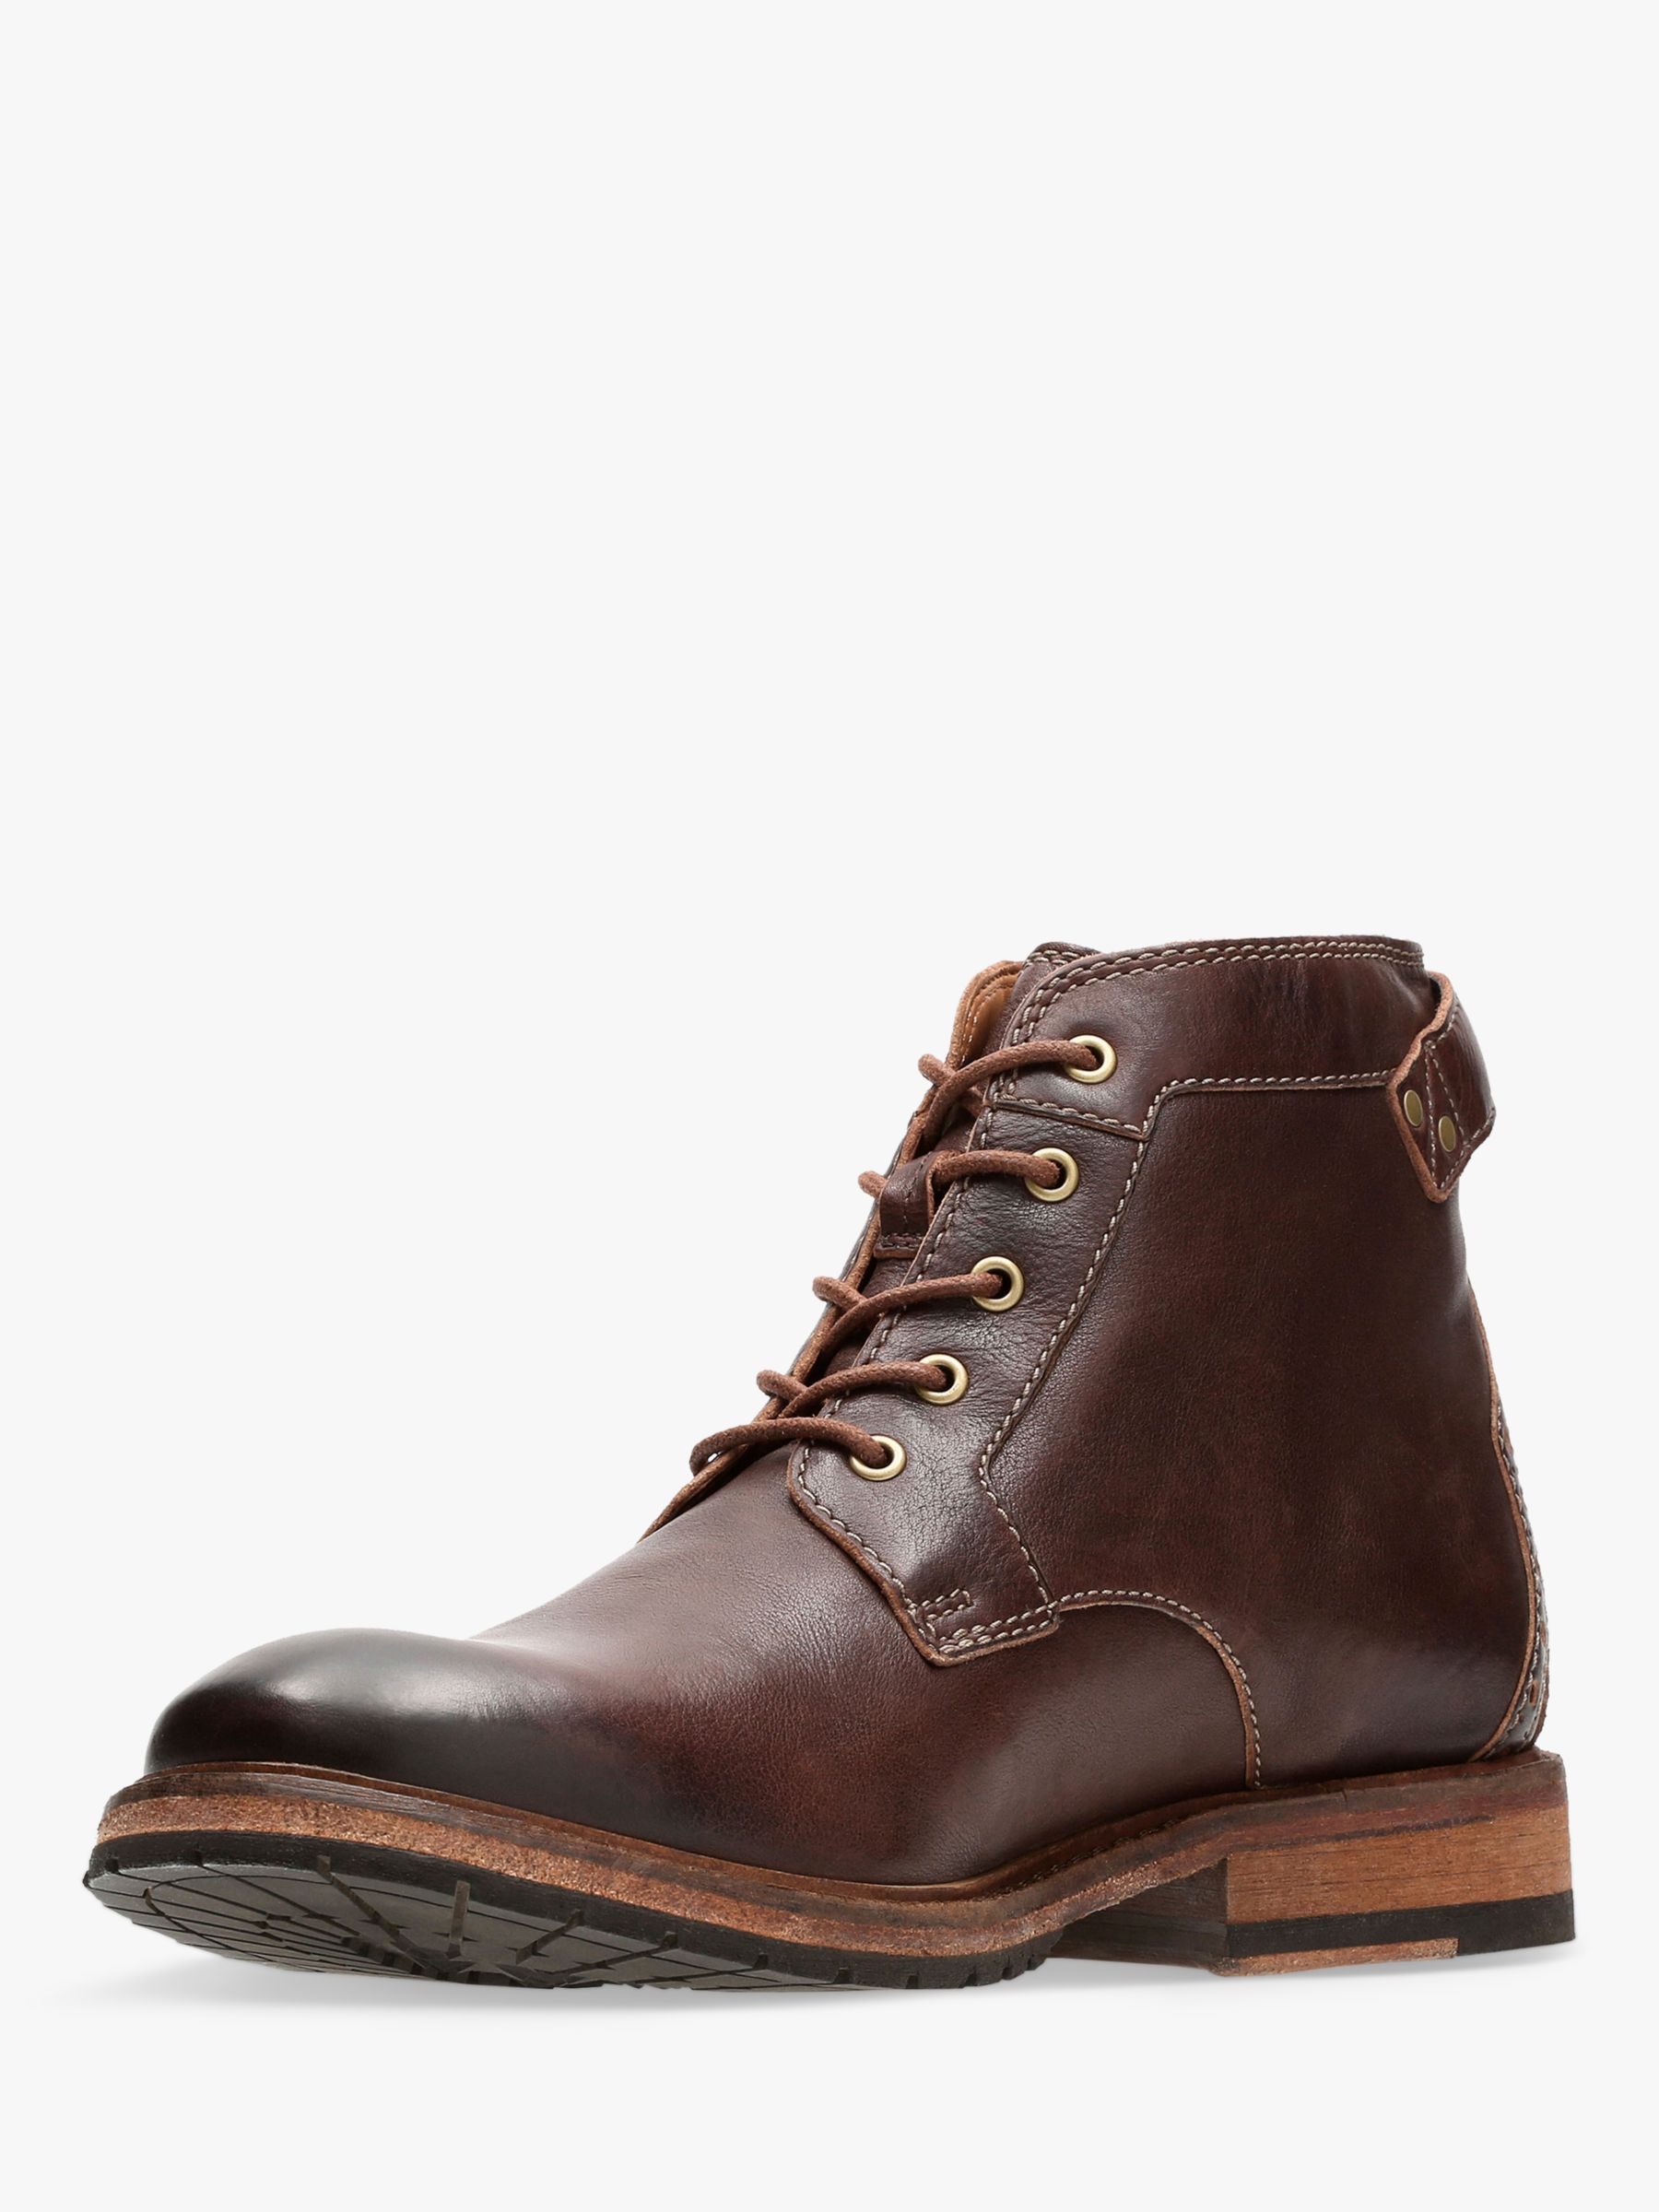 clarks clarkdale bud leather boots